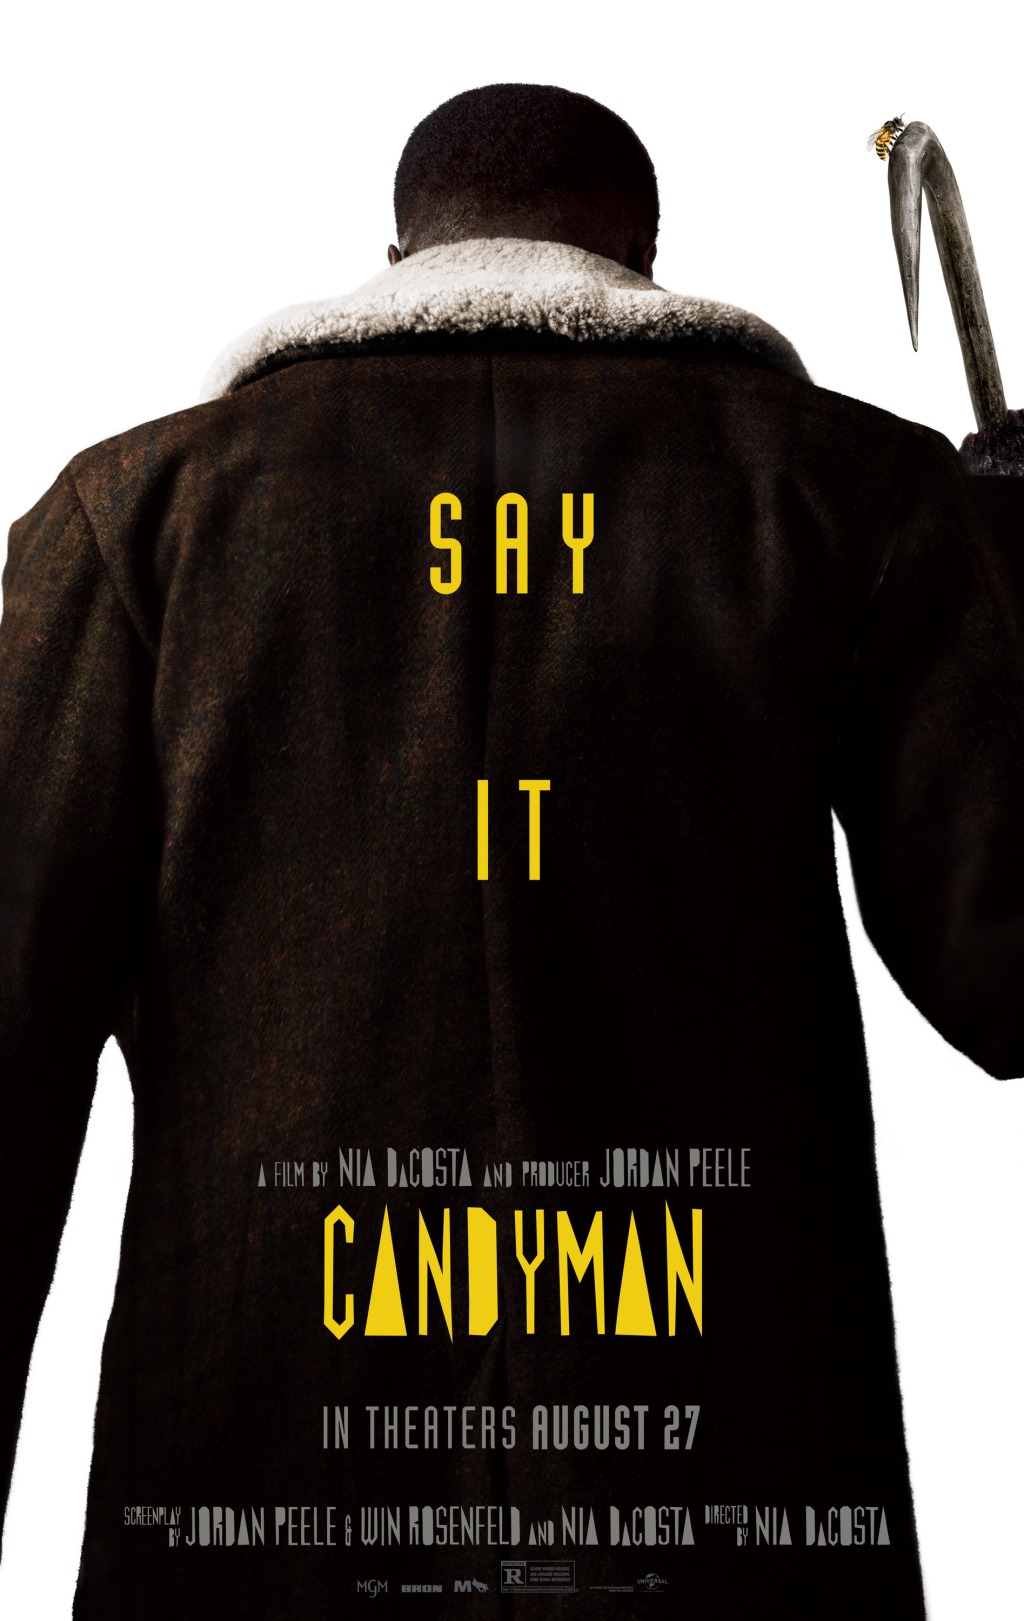 Candyman (2021) Movie Review: Social commentary through the lens of horror